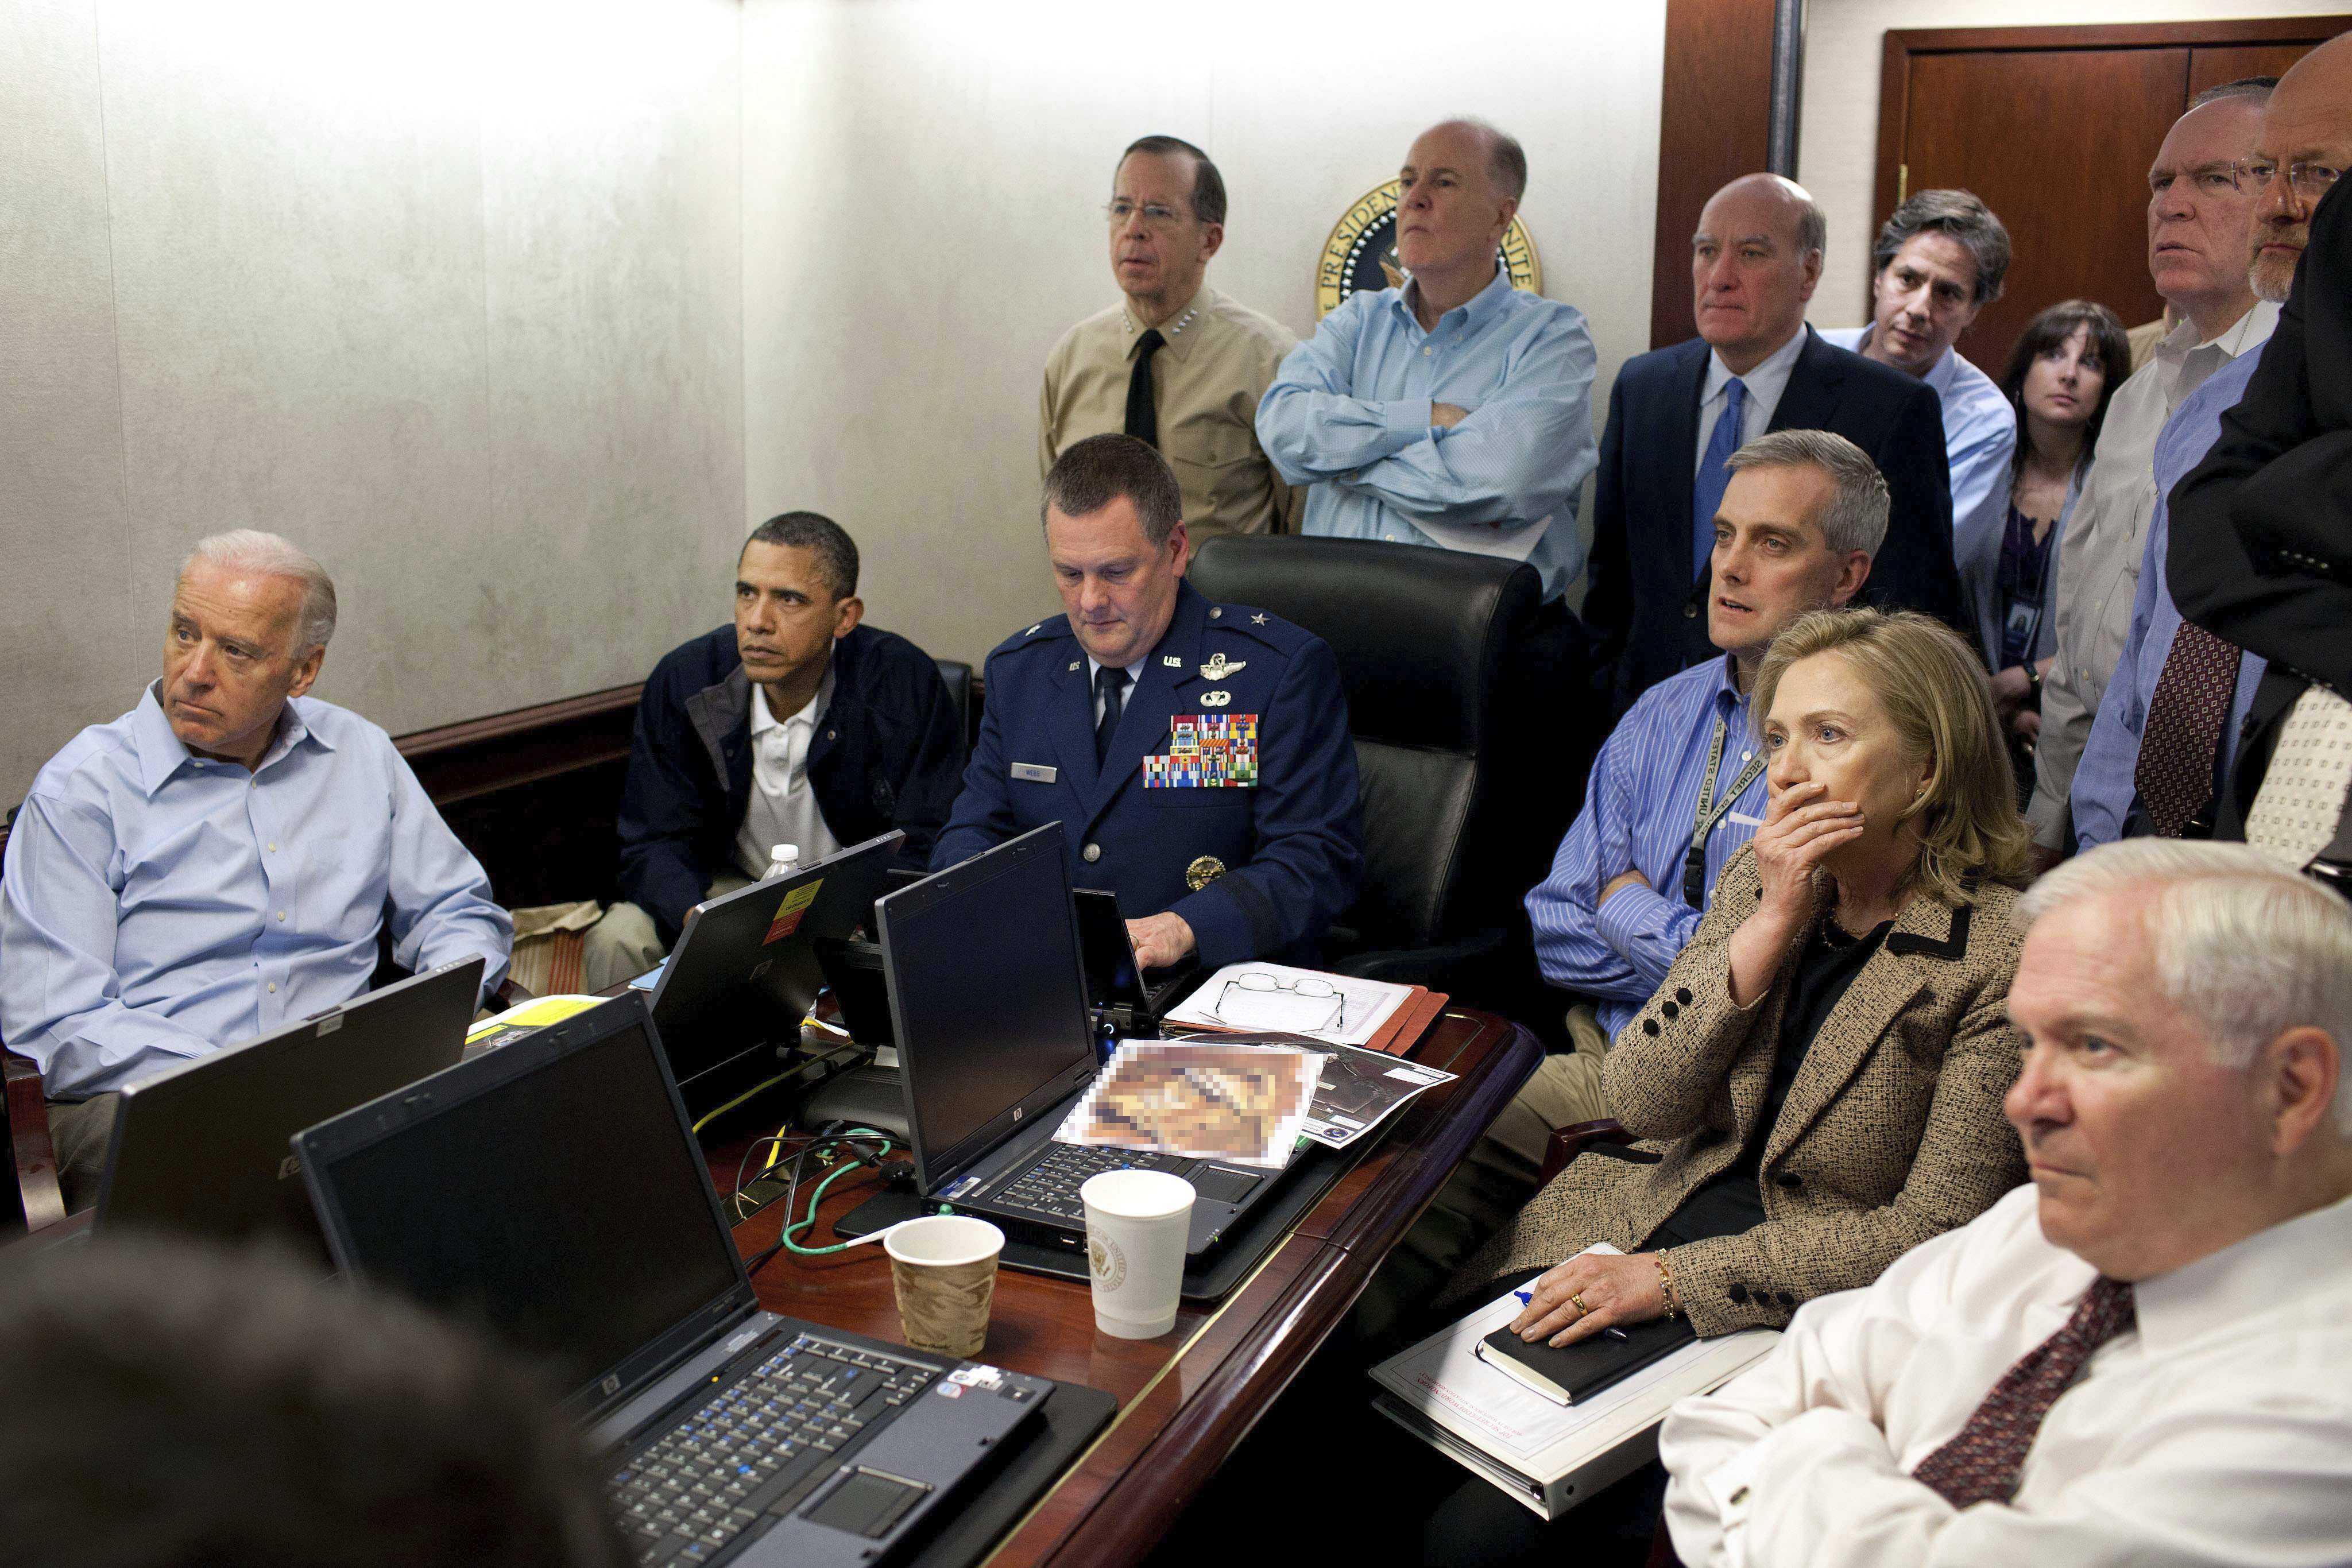  (Pete Souza | The White House via AP) In this image released by the White House and digitally altered by the source to diffuse the paper in front of Secretary of State Hillary Rodham Clinton, President Barack Obama and Vice President Joe Biden, along with with members of the national security team, receive an update on the mission against Osama bin Laden in the Situation Room of the White House on Sunday, May 1, 2011, in Washington.